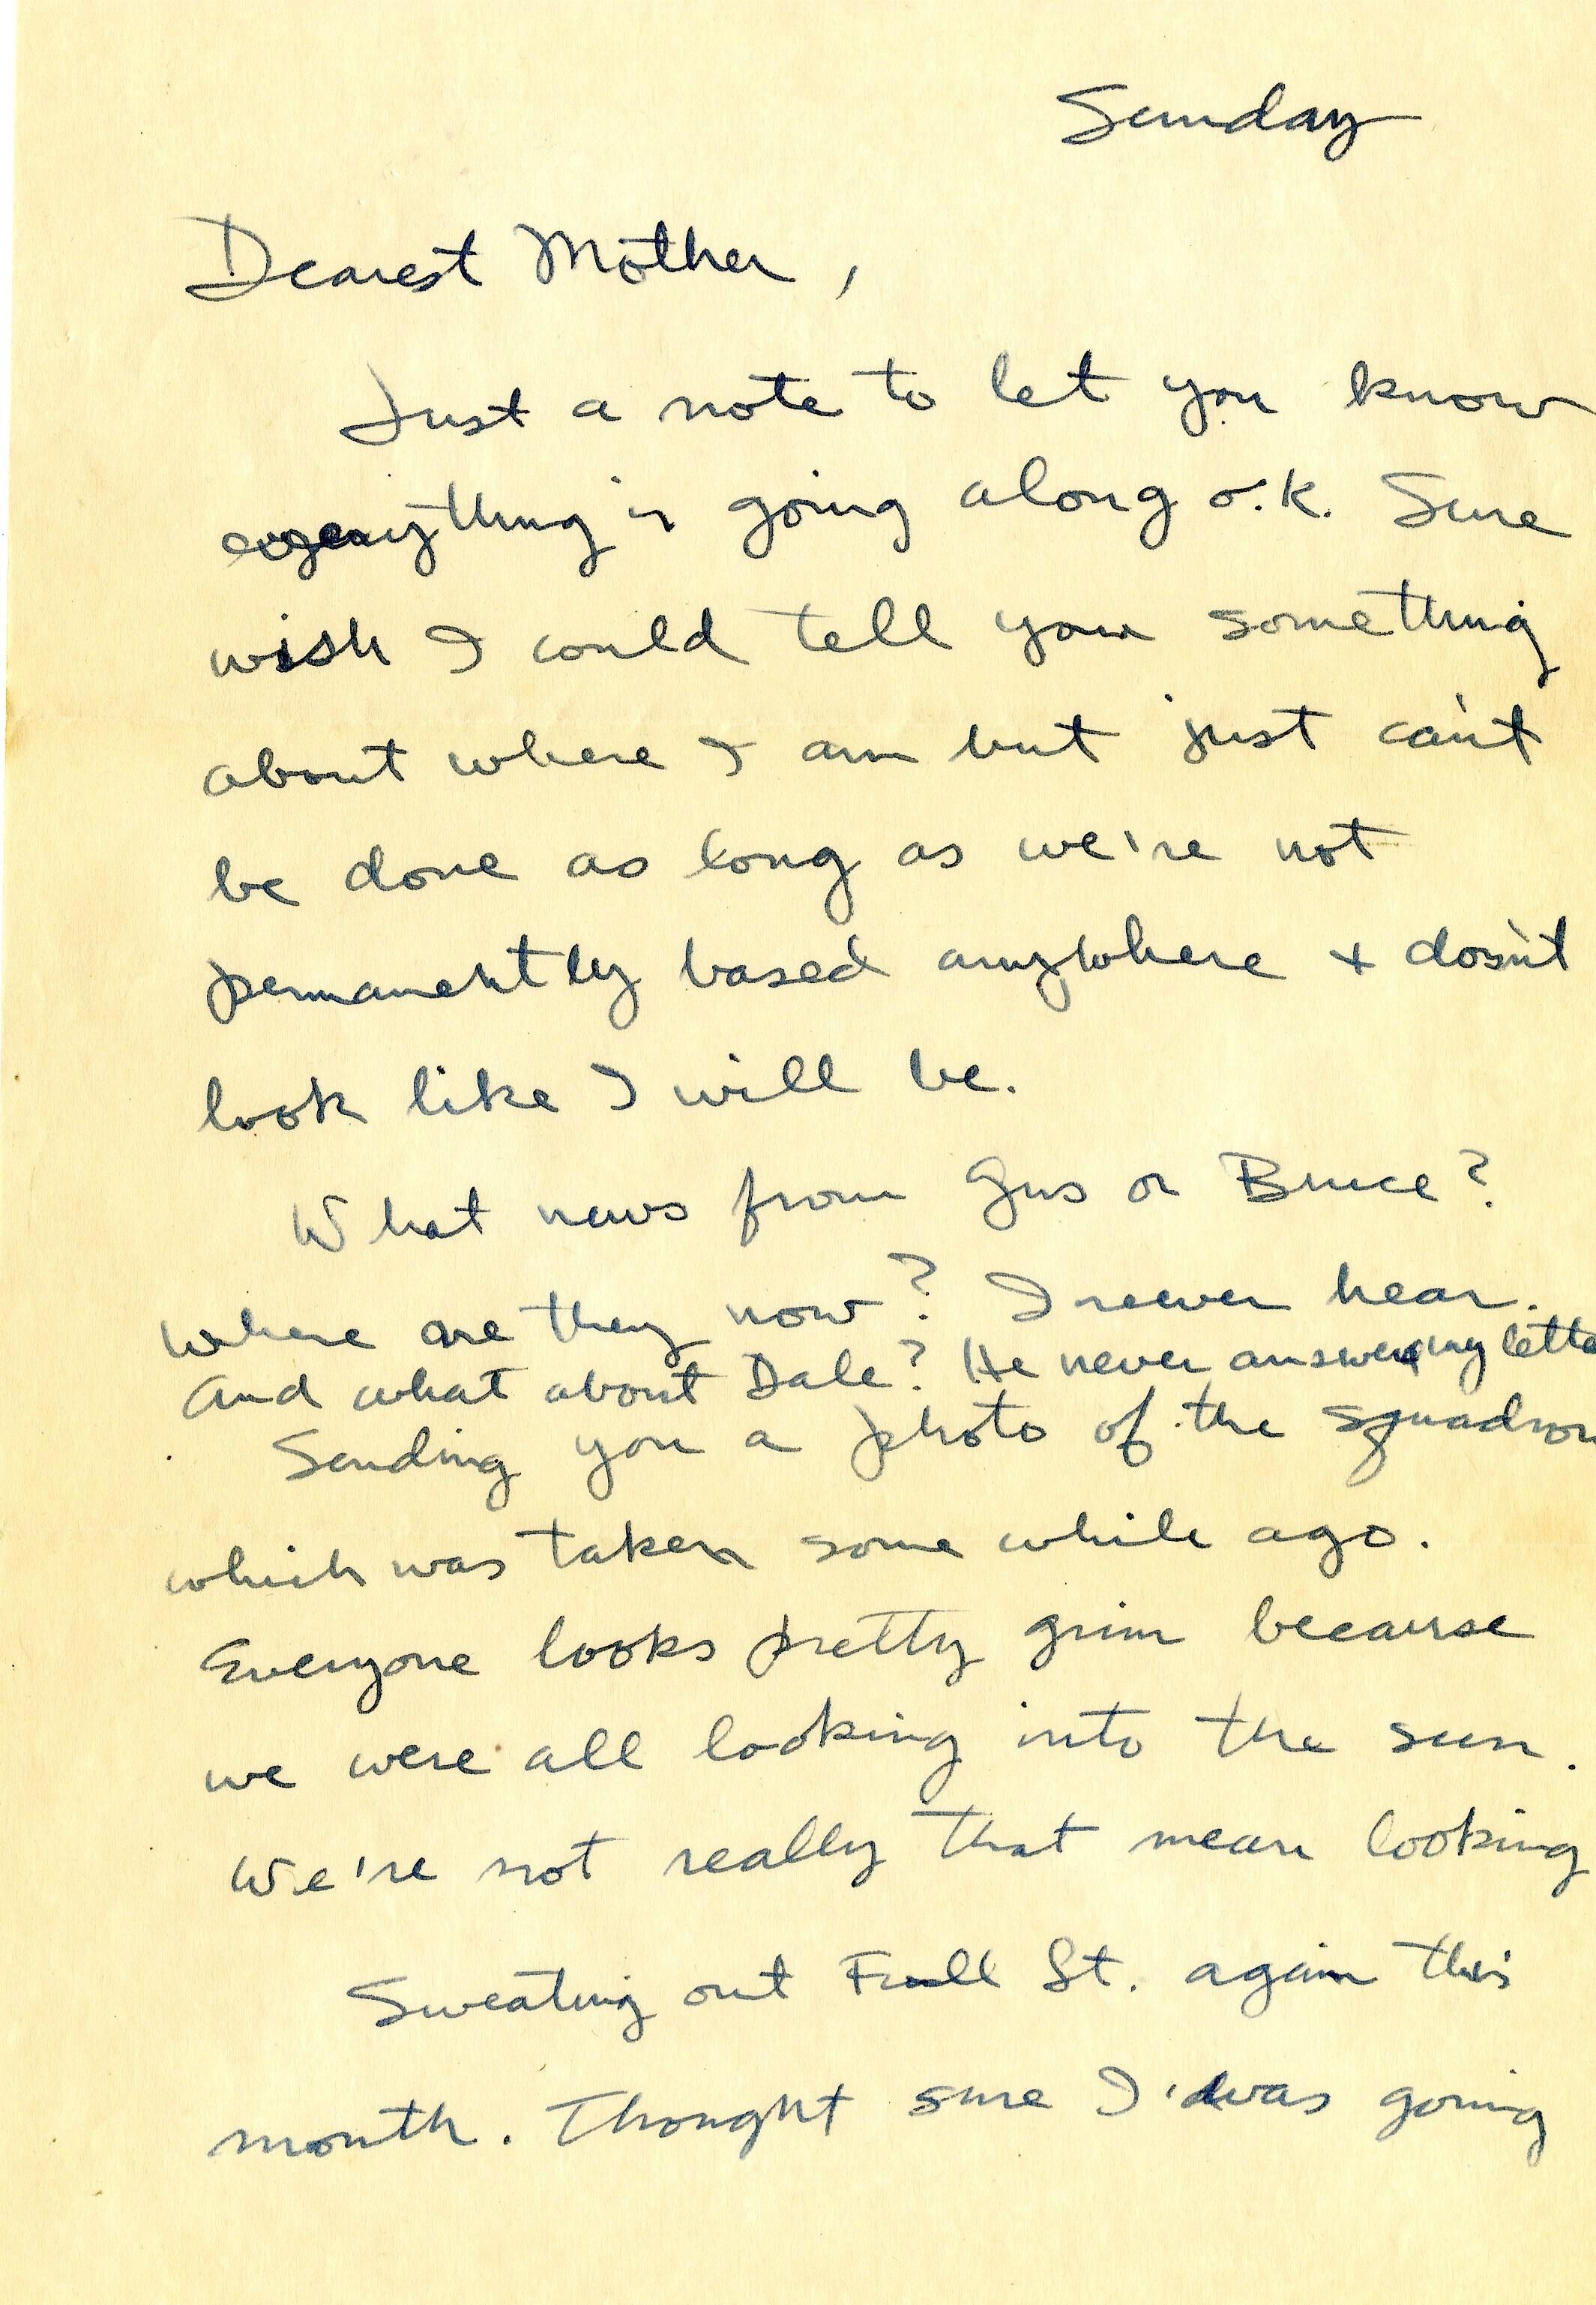 Primary Image of Letter from Gerald Hennesy to His Mother Dated April 19, 1945